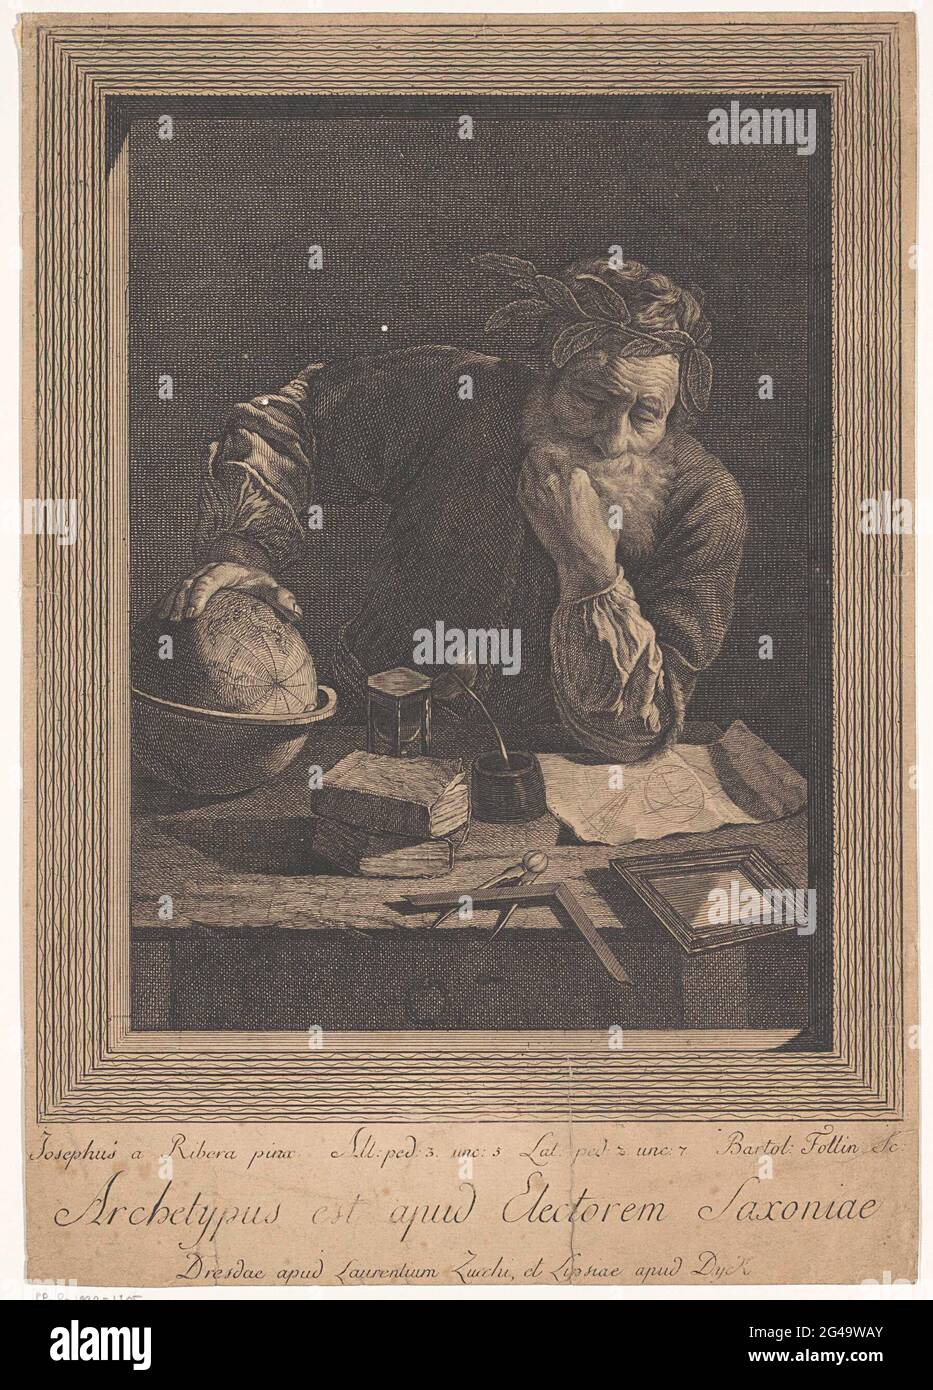 Portrait of philosopher; Archimedes; Archetypus est apud electorem saxoniae. The philosopher Archimedes with laurel branch on the head, sitting at the table, his hand resting on a globe. On the table an hourglass, a geometric drawing, books, writing utensils, measuring instruments and a mirror. Text in undermarge. Stock Photo